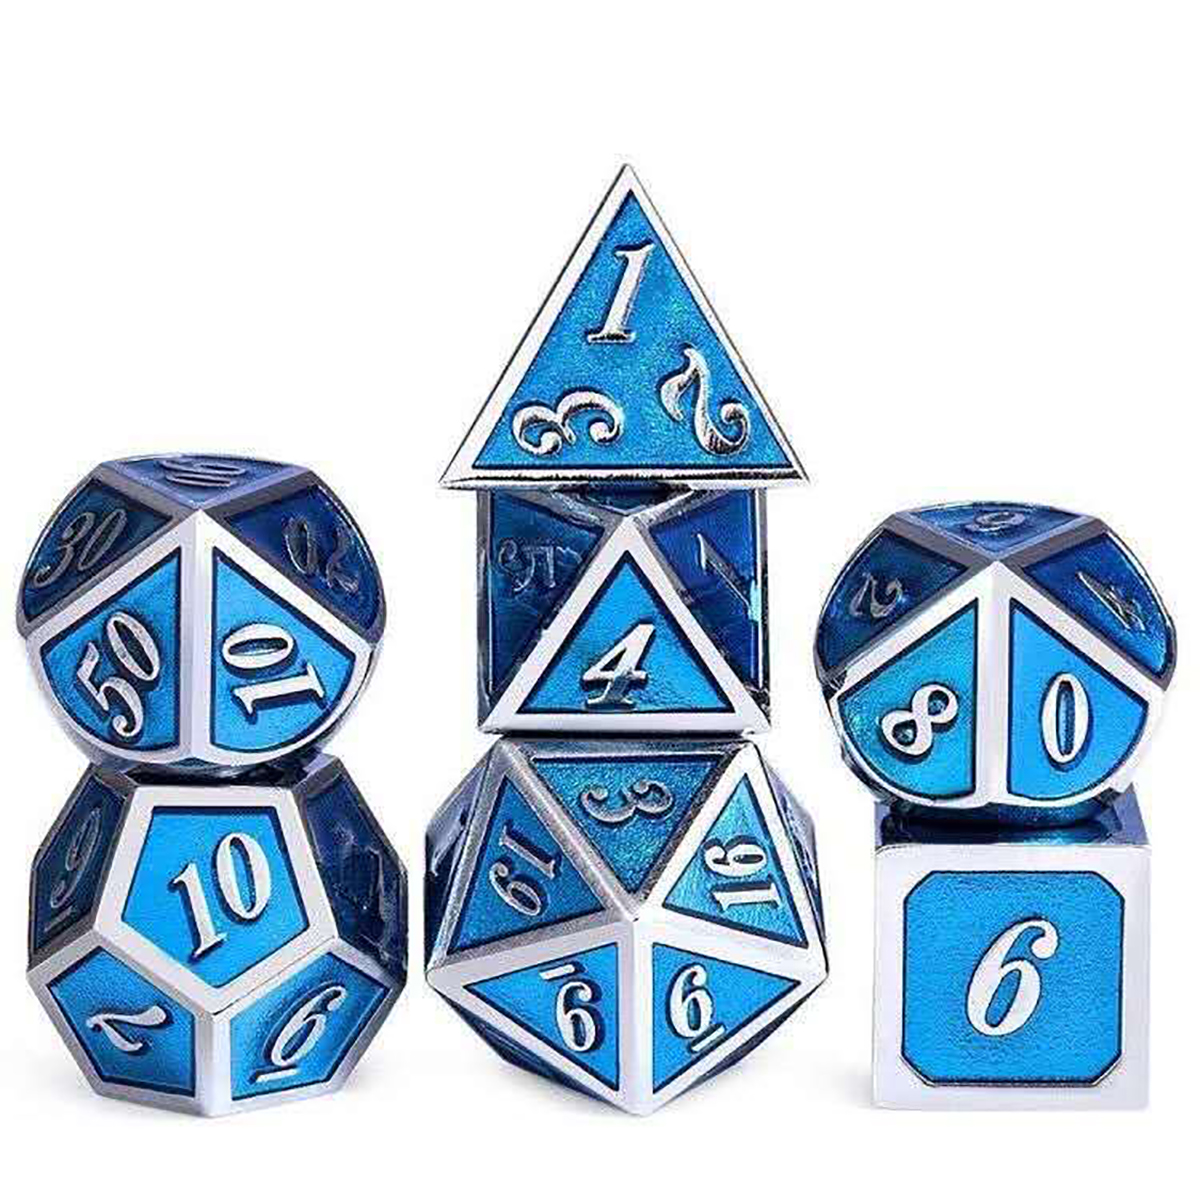 7-PcsSet-Metal-Dice-Set-Role-Playing-Dragons-Table-Board-Game-Toys-With-Cloth-Bag-Bar-Party-Game-Dic-1672532-3